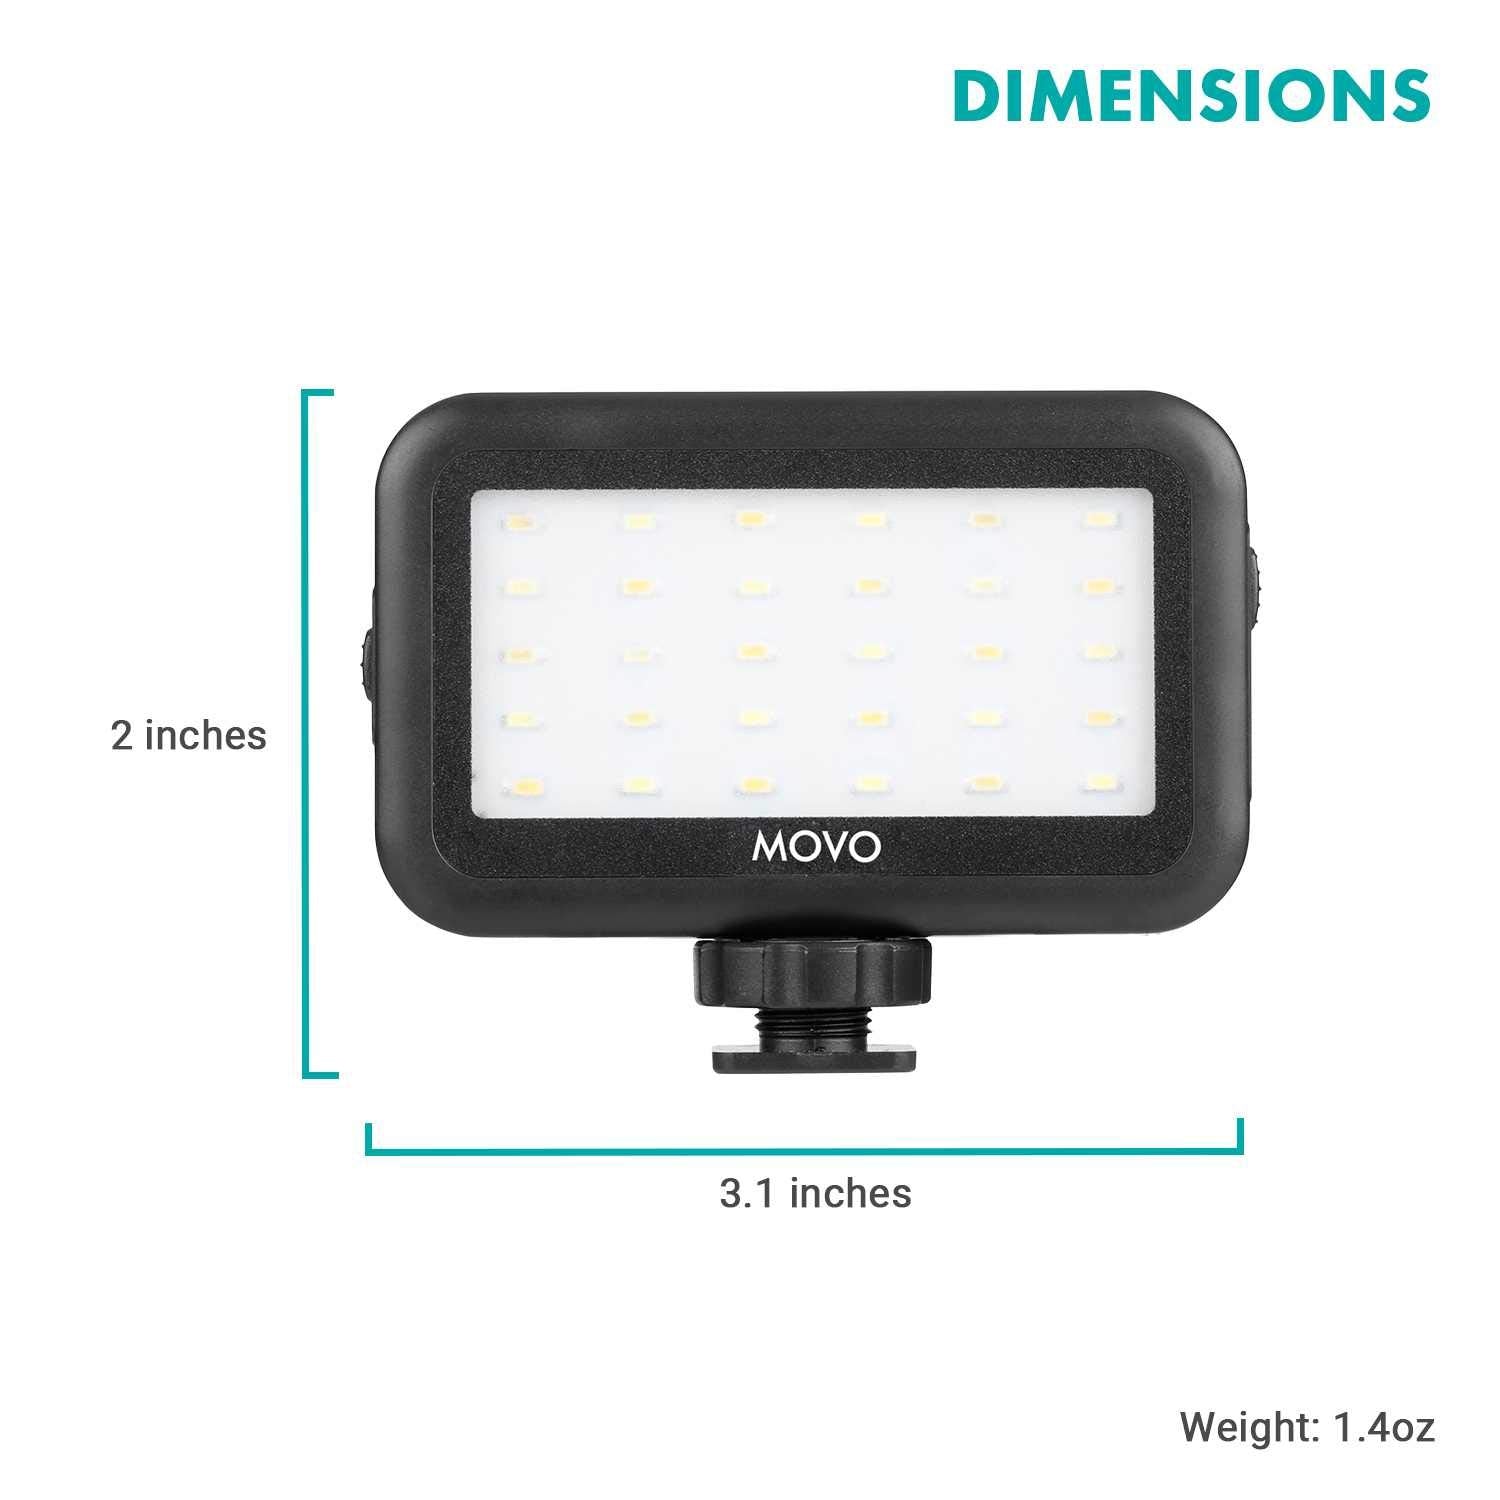 Movo LED-30 Mini LED Light Panel with Adjustable Brightness and Rechargeable Battery - Portable Light Perfect for Photography, Videos, and More  - Like New